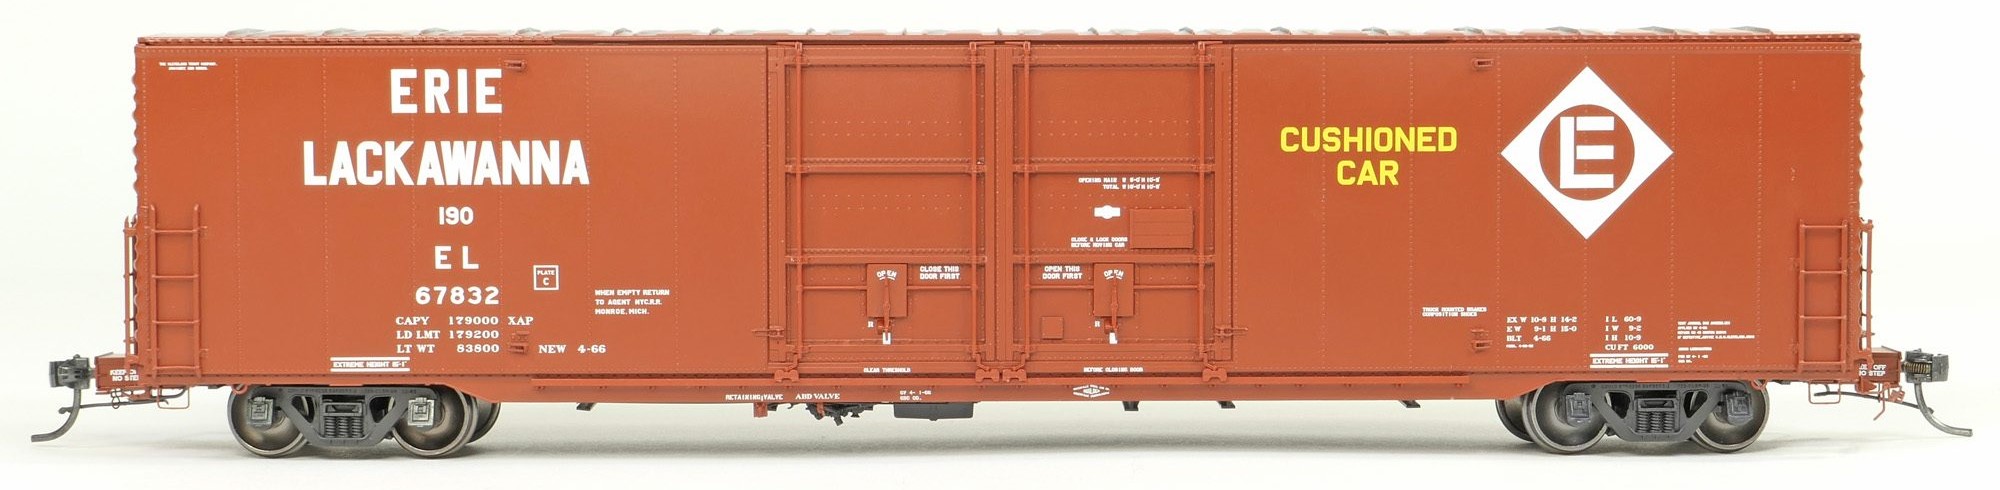 Tangent Scale Models HO 33012-06 Greenville 6,000CuFt 60' Double Door Box Car Erie Lackawanna 'Delivery Red 1966' EL #67835